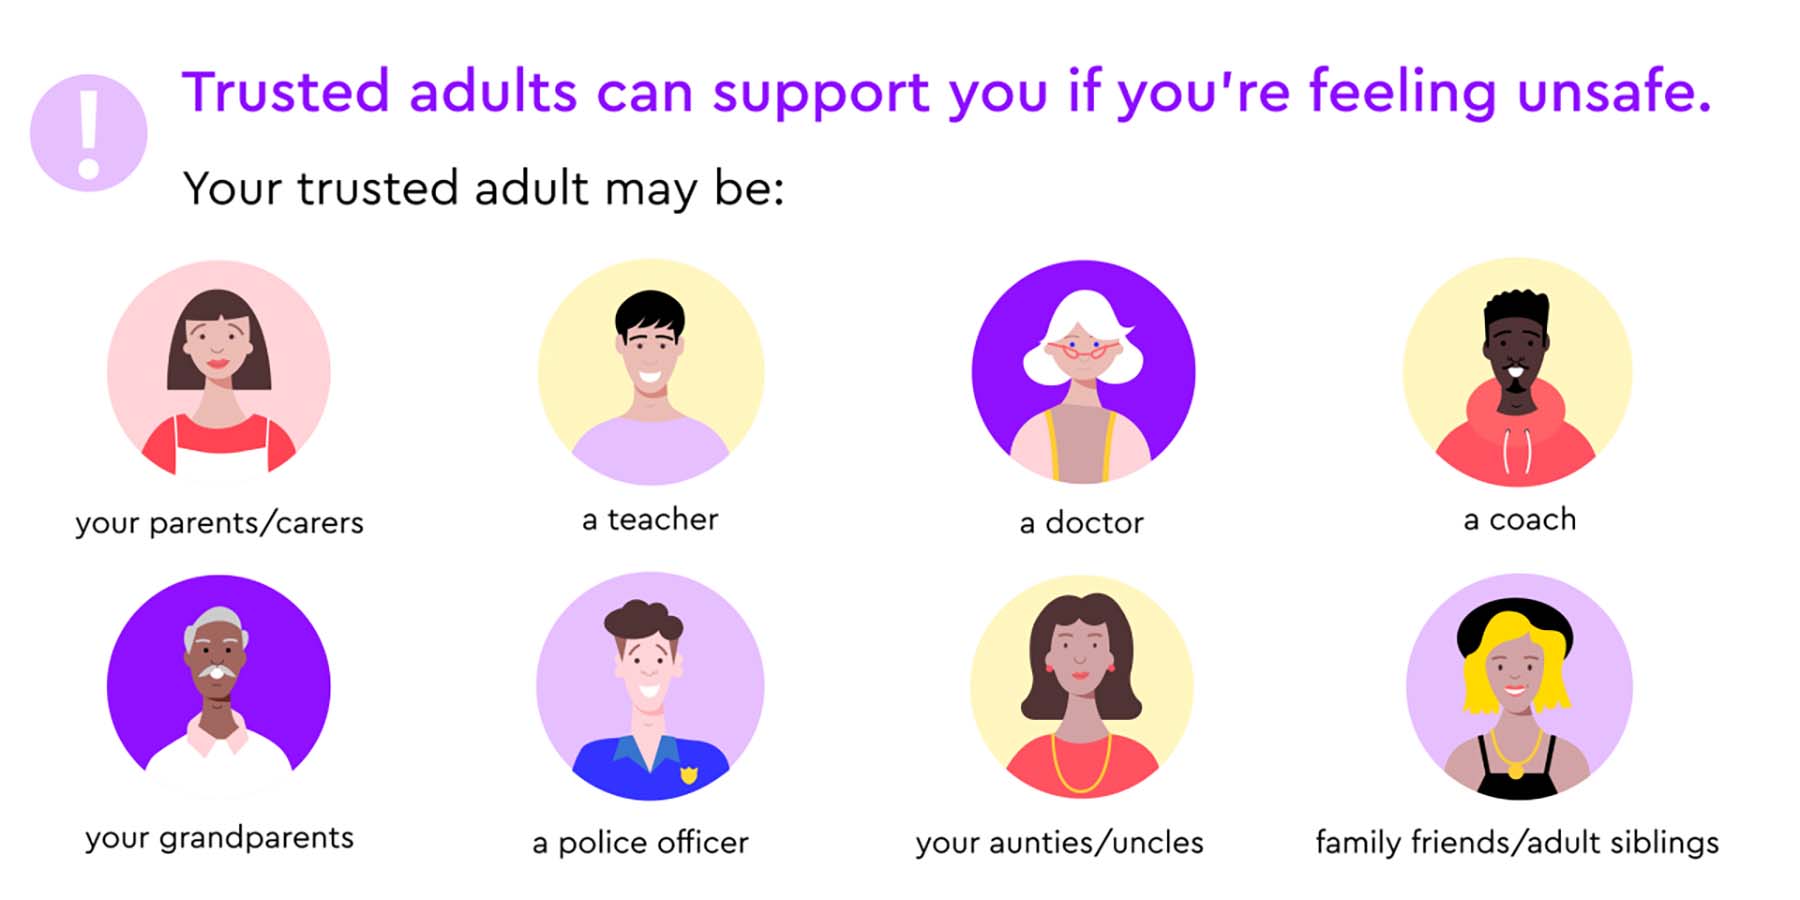 Trusted adults can support you if you're feeling unsafe. Your trusted adult may be: icons of trusted adults